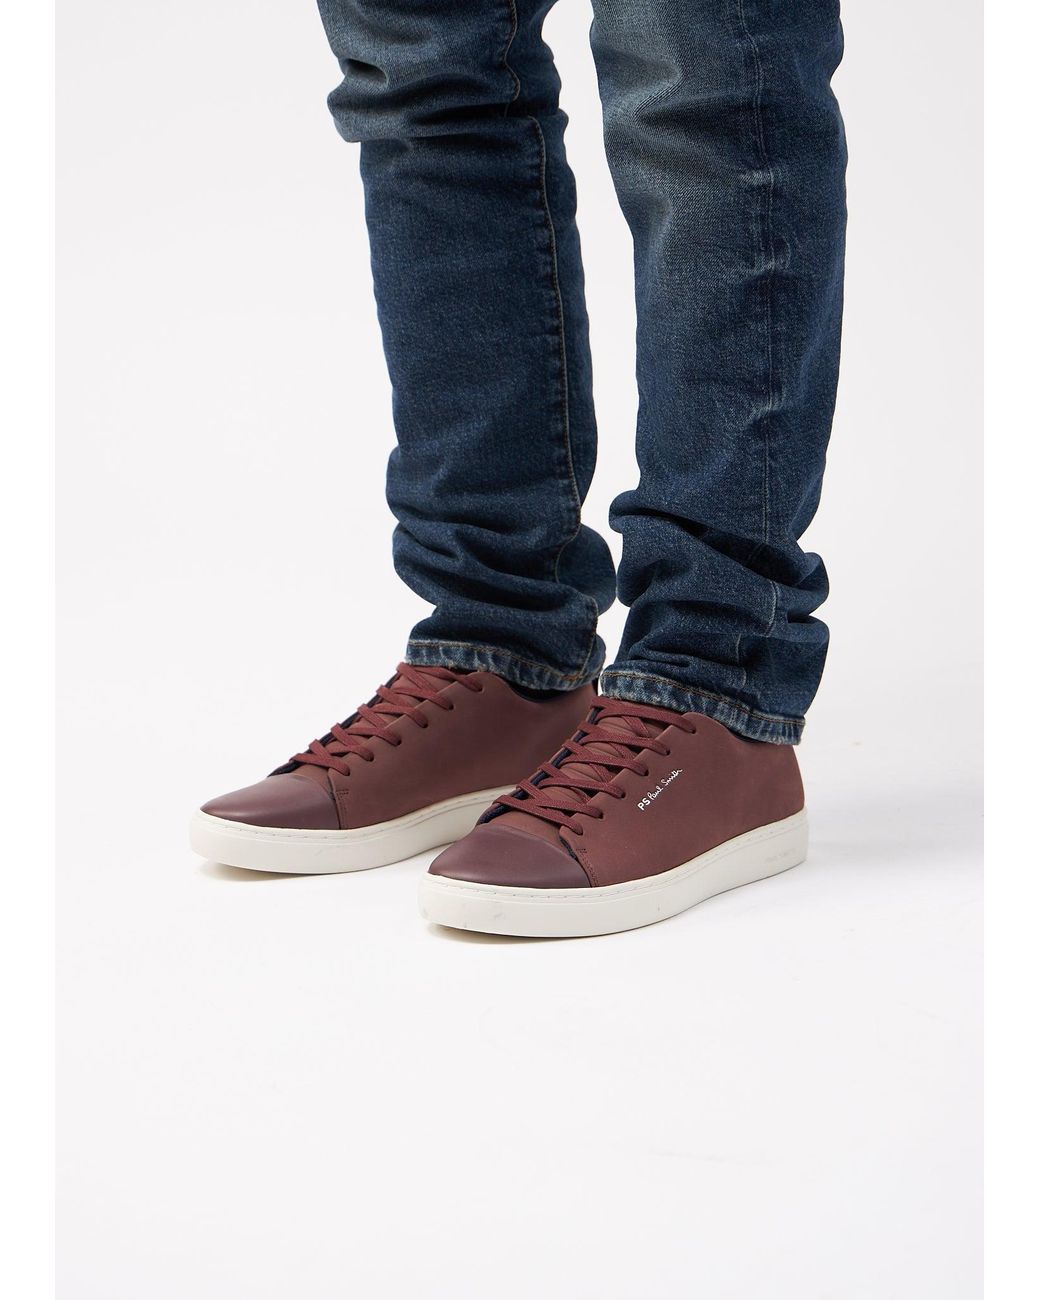 Paul Smith Lee Bordo Trainers in Burgundy (Red) for Men - Save 19% | Lyst